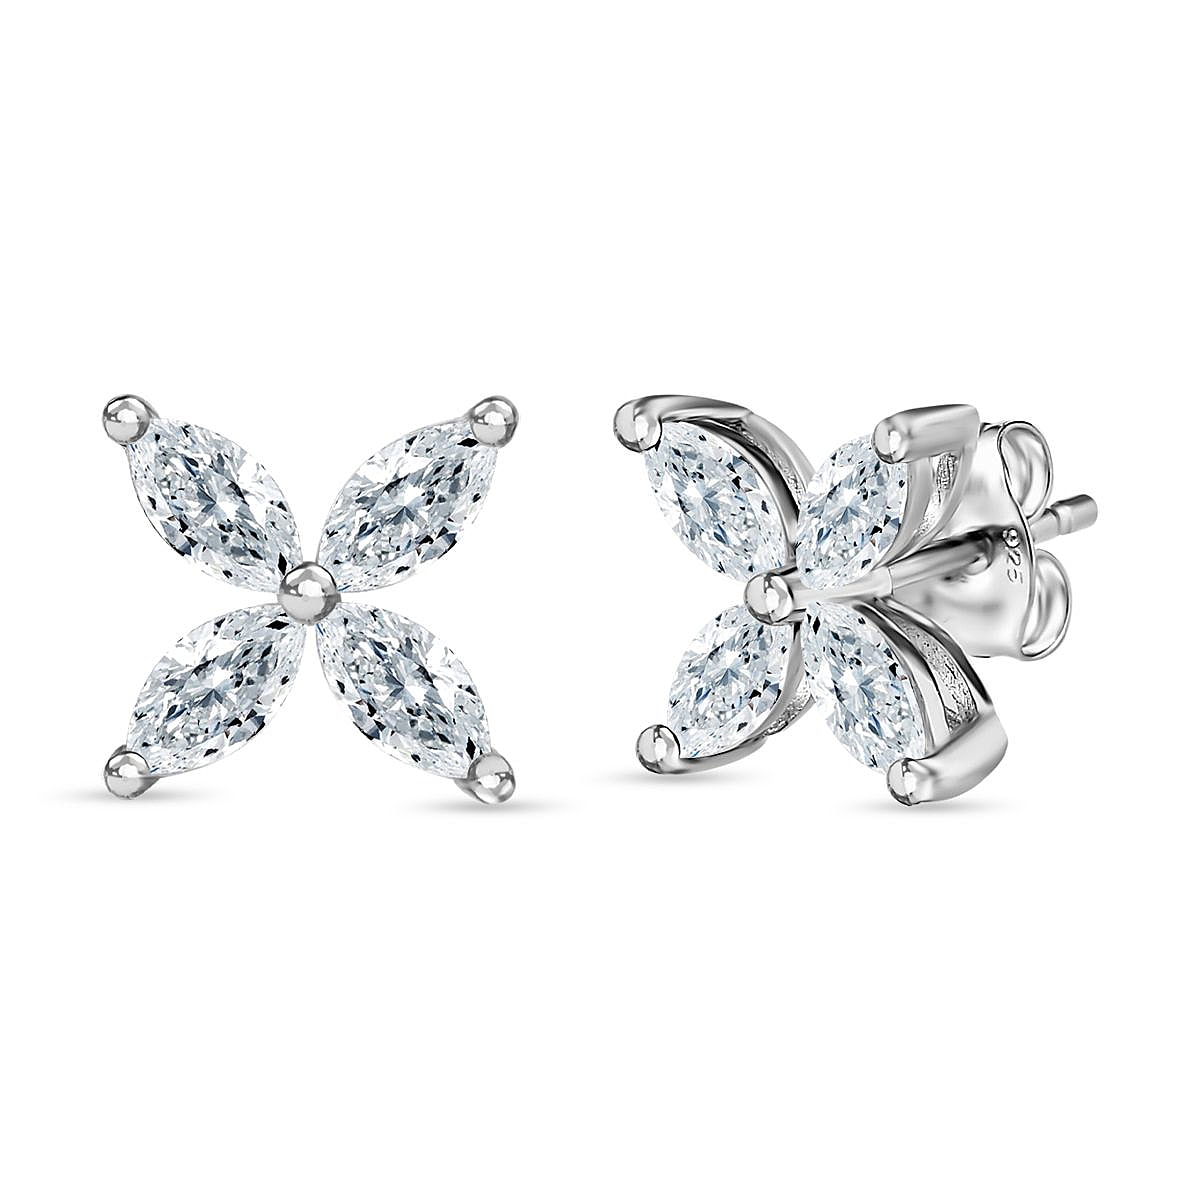 Moissanite Floral Stud Earrings in Platinum Overlay Sterling Silver 1.77 Ct.